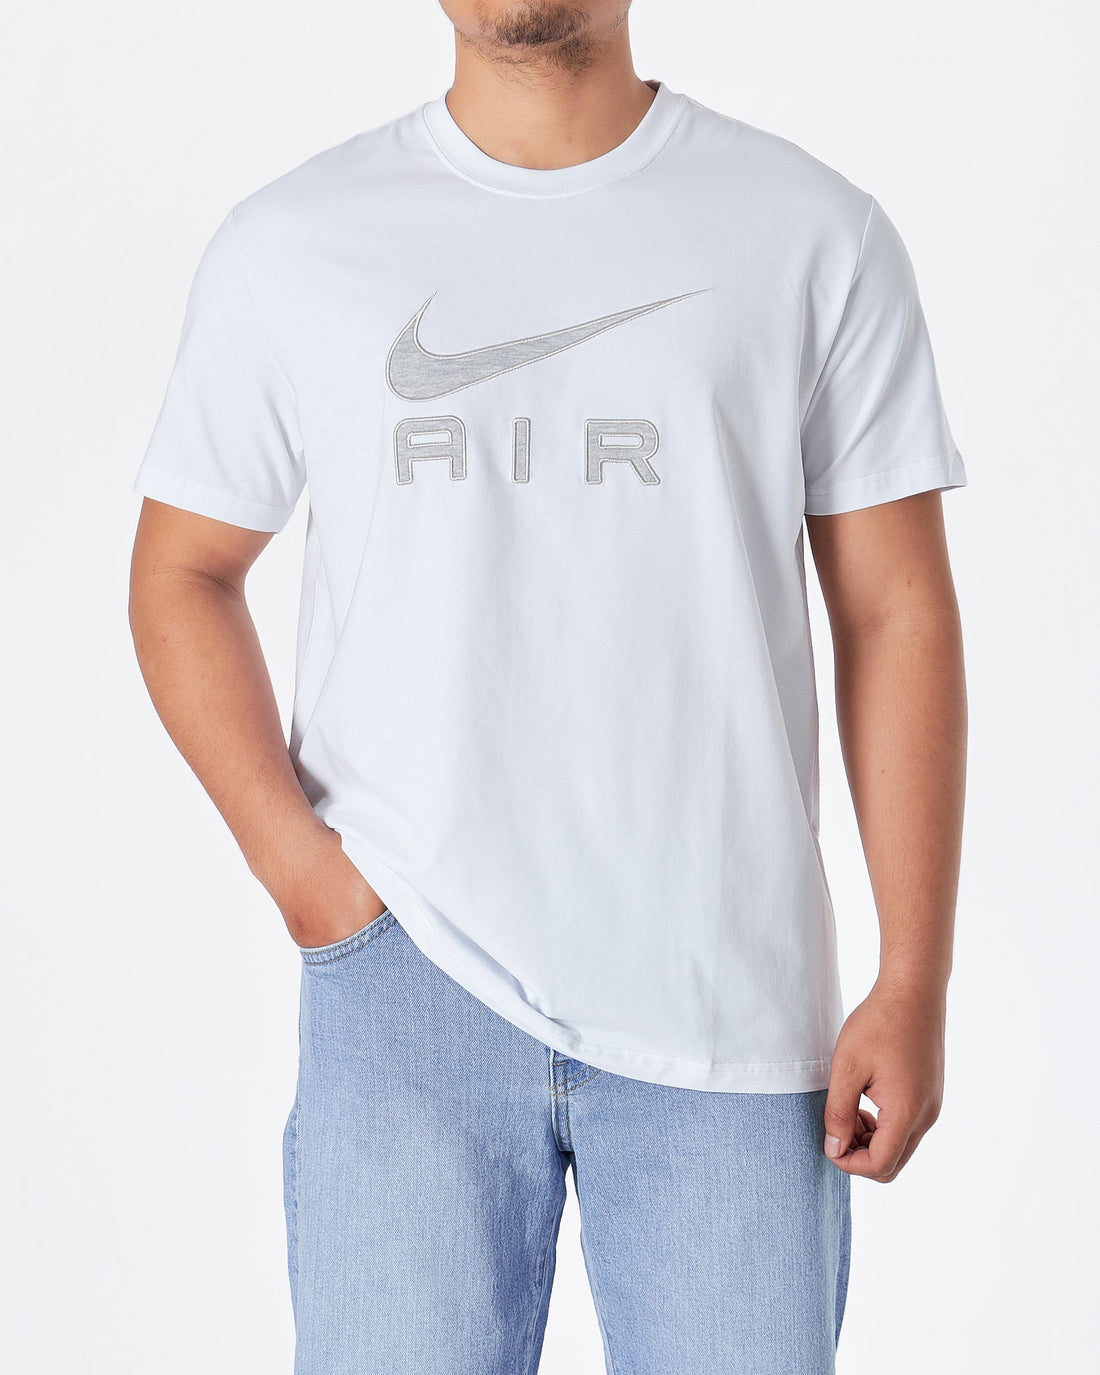 MOI OUTFIT-NIK Air Embroidered Men White T-Shirt 16.90